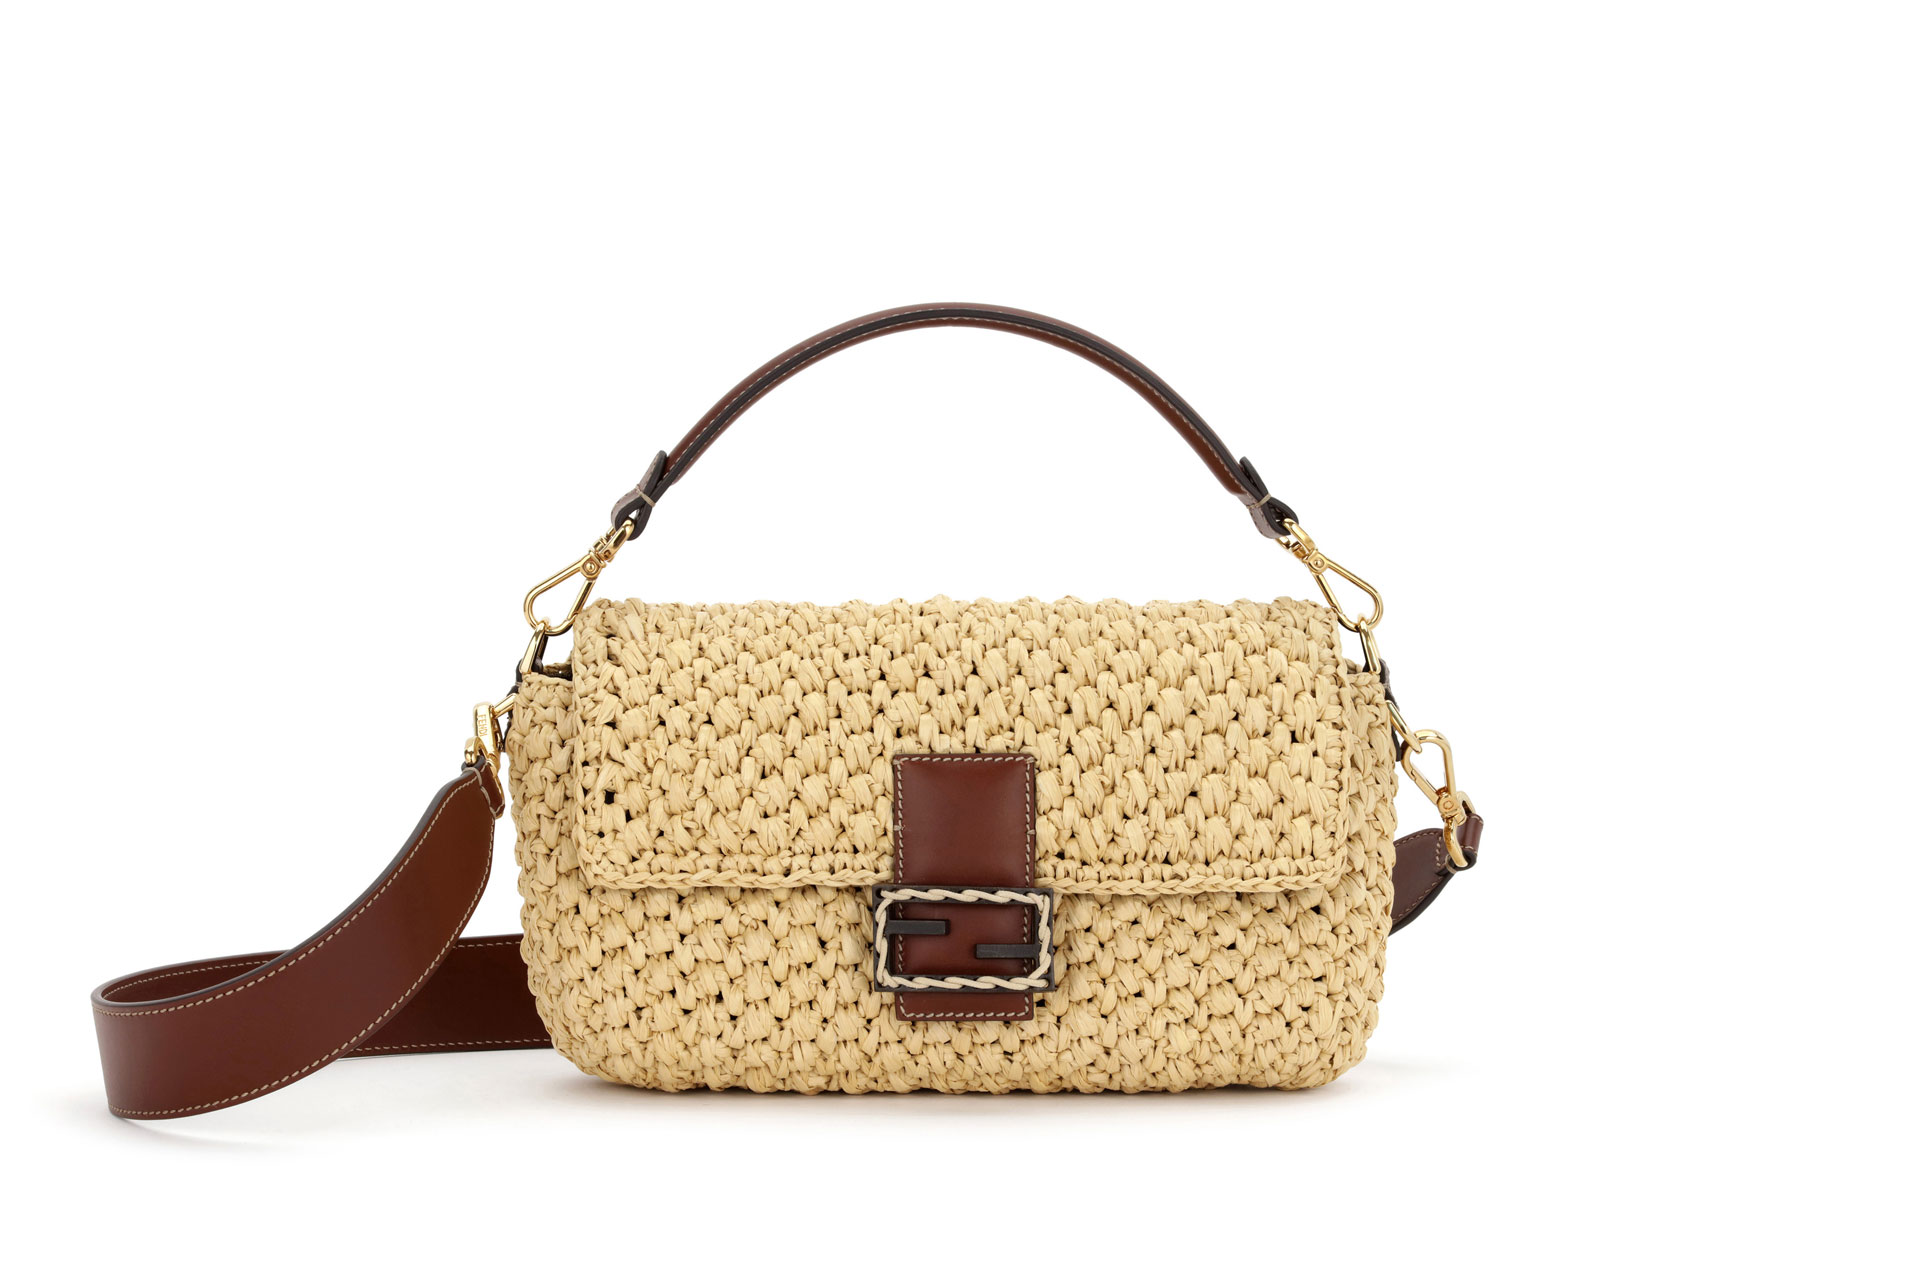 The Fendi Baguette is Trending – Thanks to Carrie Bradshaw - Baguette Bags